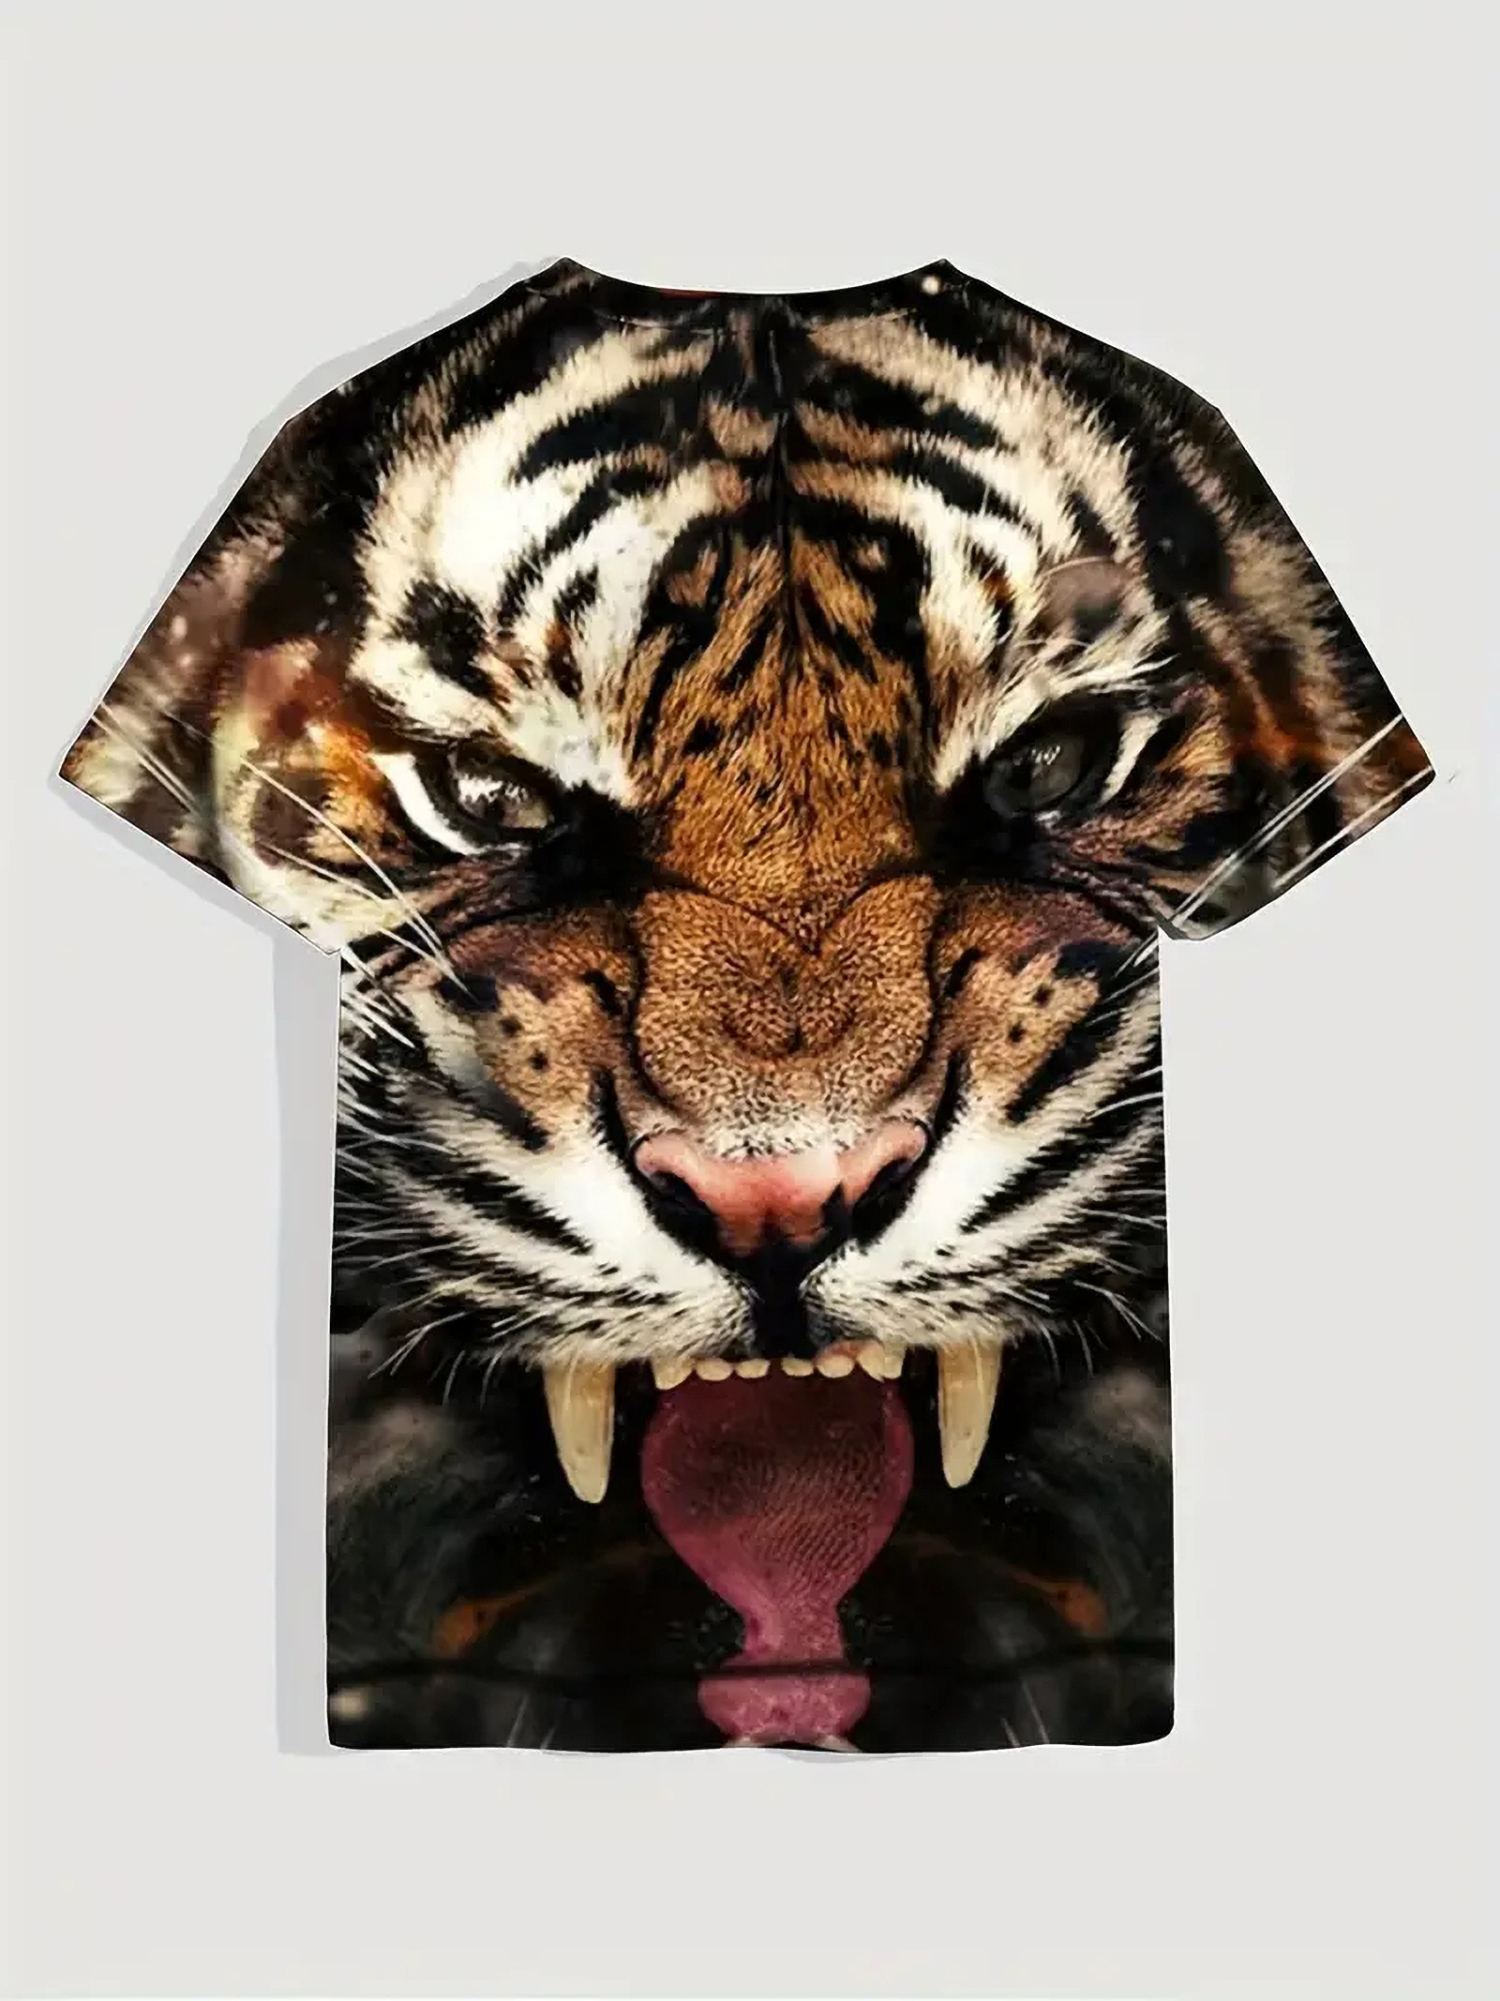 Men's Graphic T-Shirt 3D Tiger Animal Printed Short Sleeve Running Gym  Workout Casual Tees Fashion Top Crew Neck Top